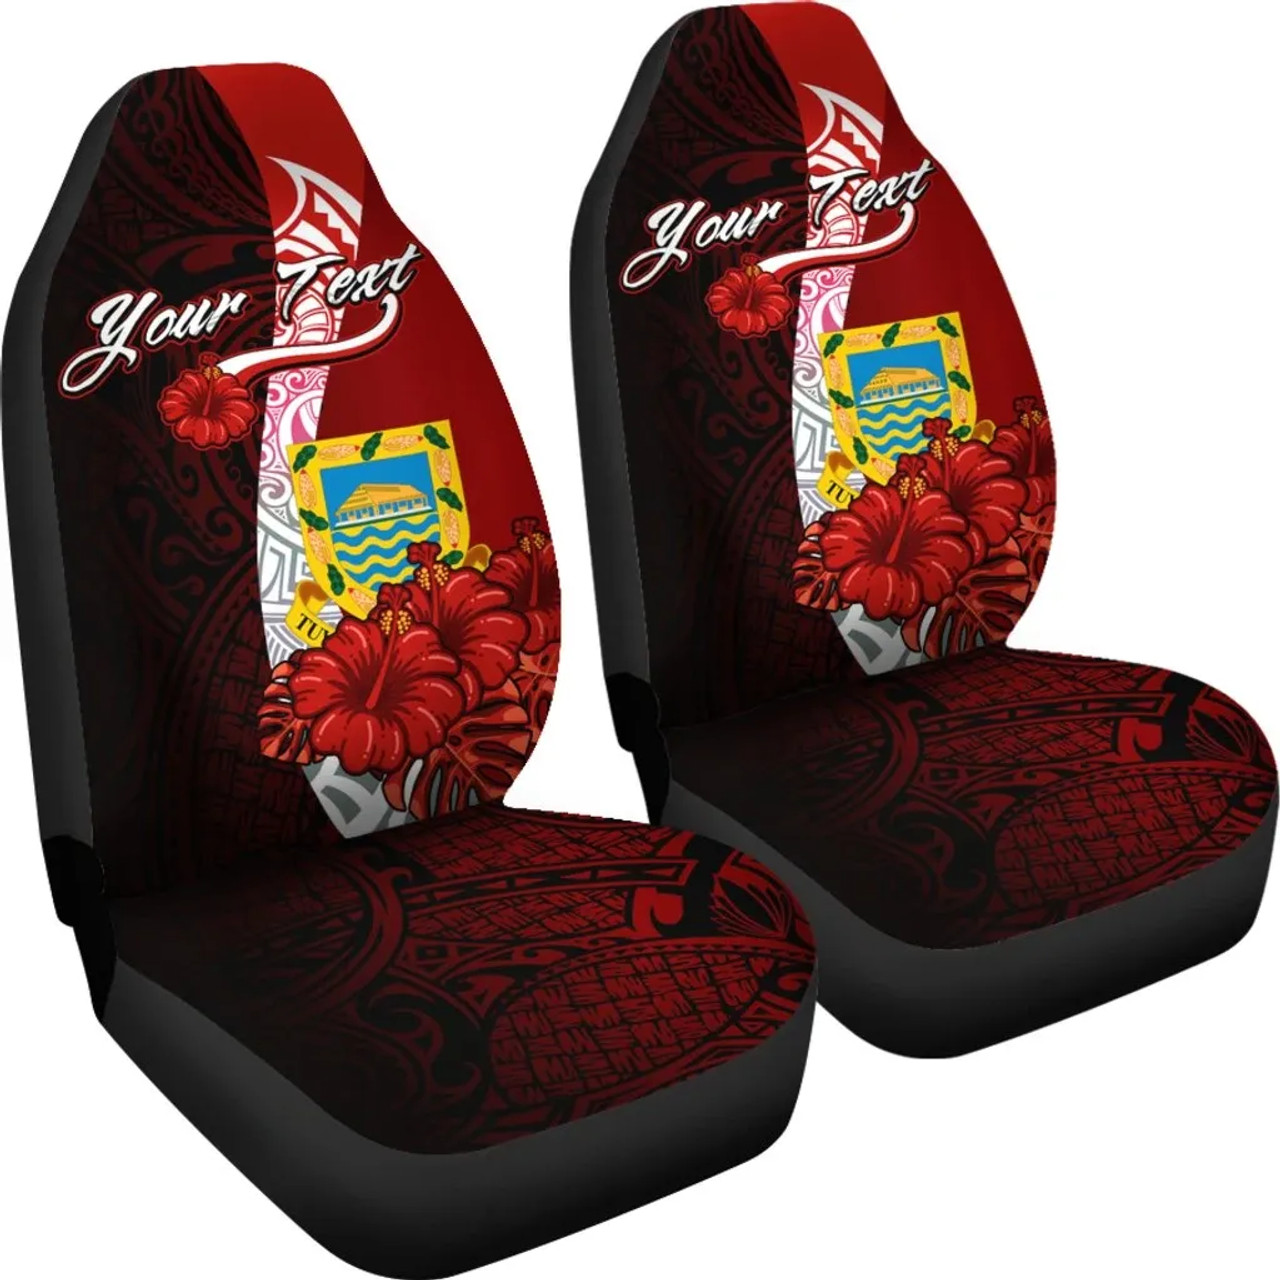 Tuvalu Polynesian Custom Personalised Car Seat Covers - Coat Of Arm With Hibiscus